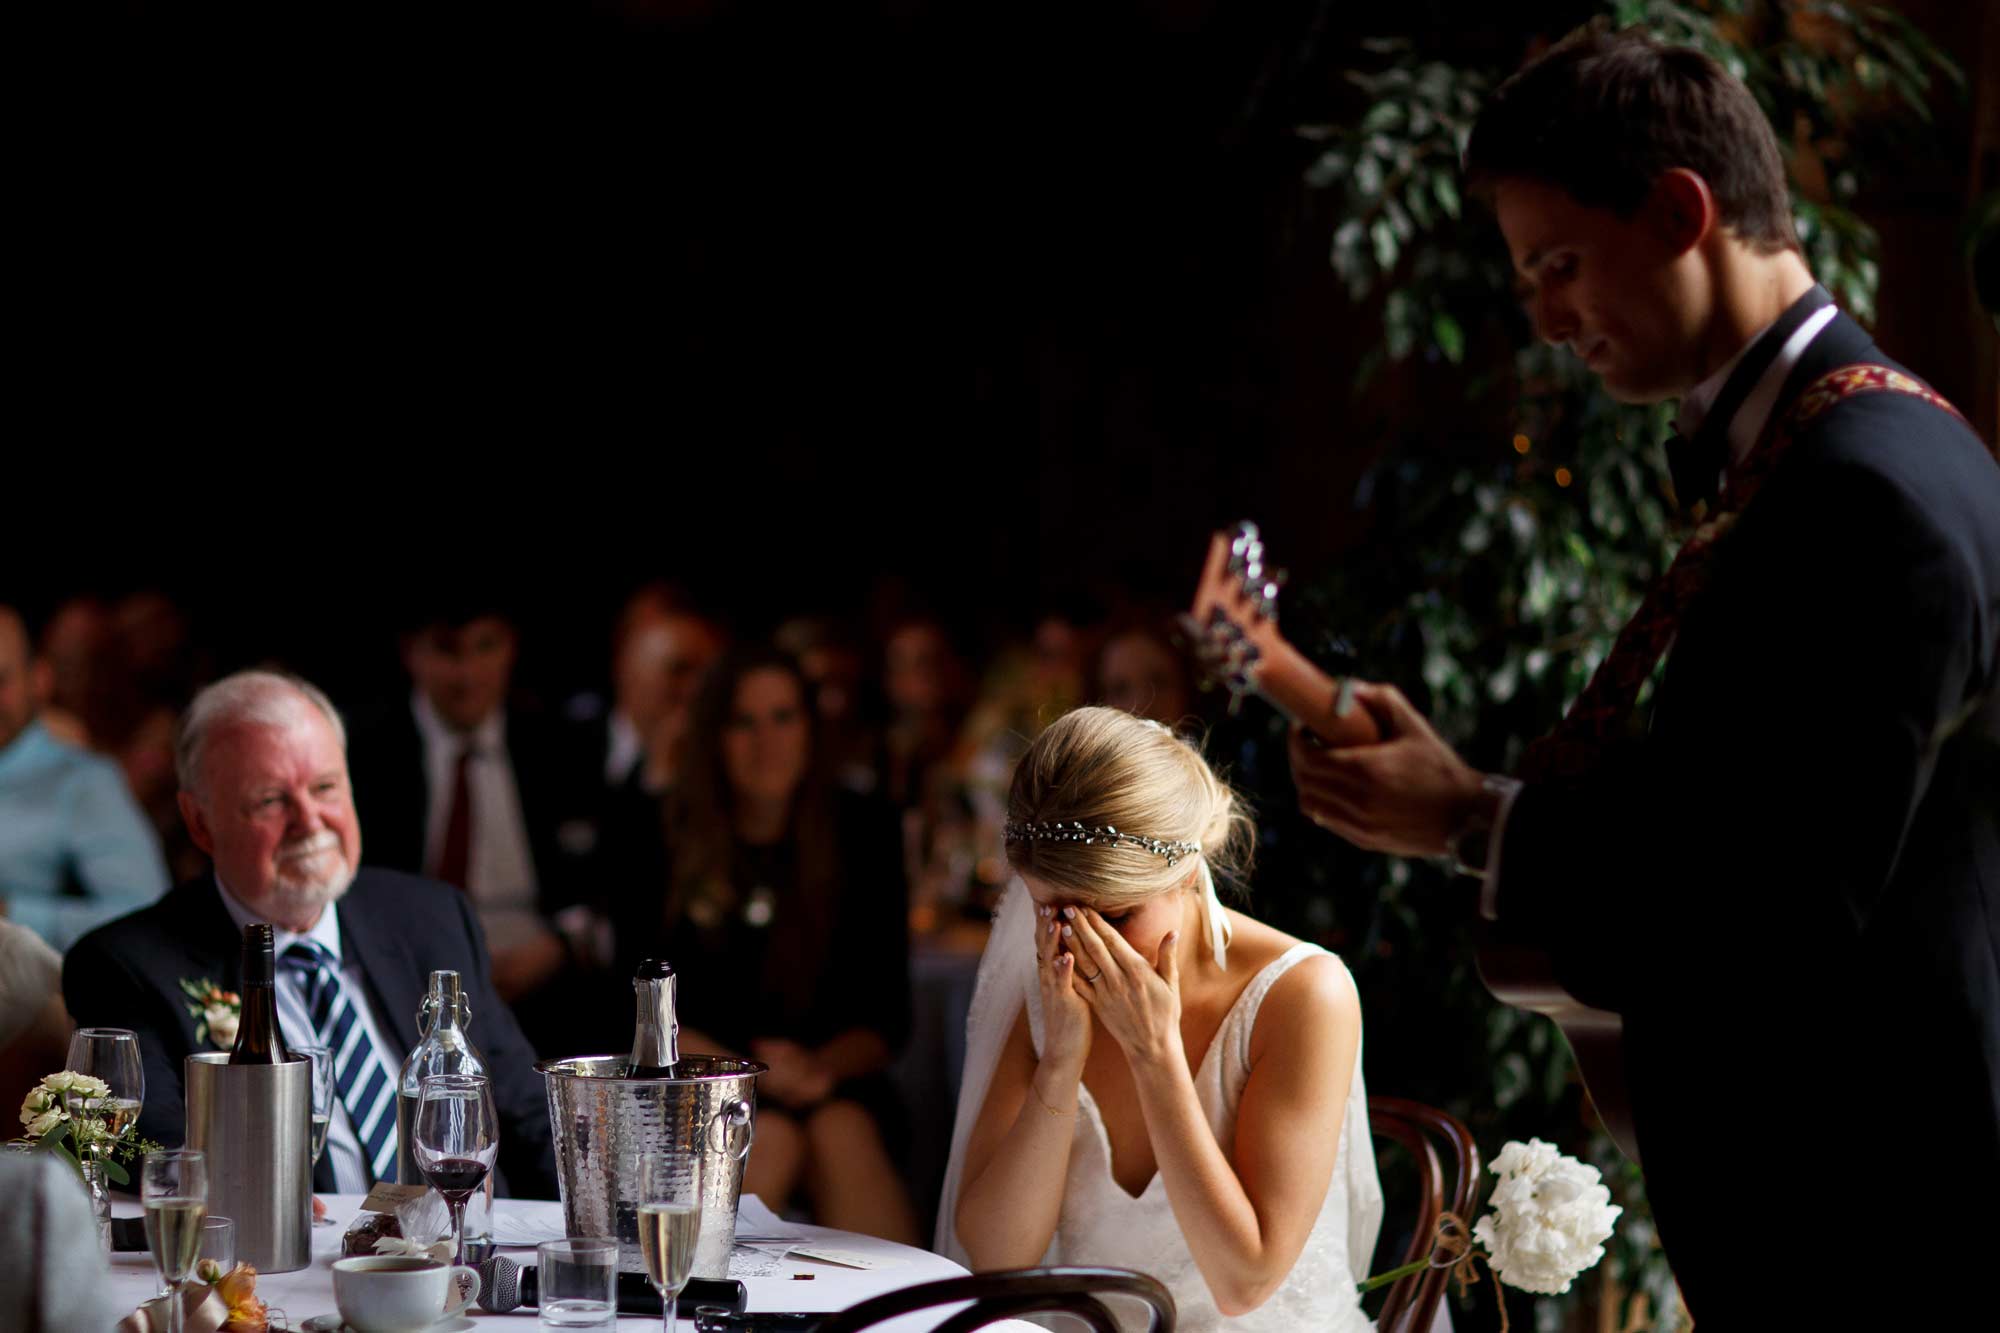 Emotional bride as her groom serenades her by playing the guitar during wedding speeches